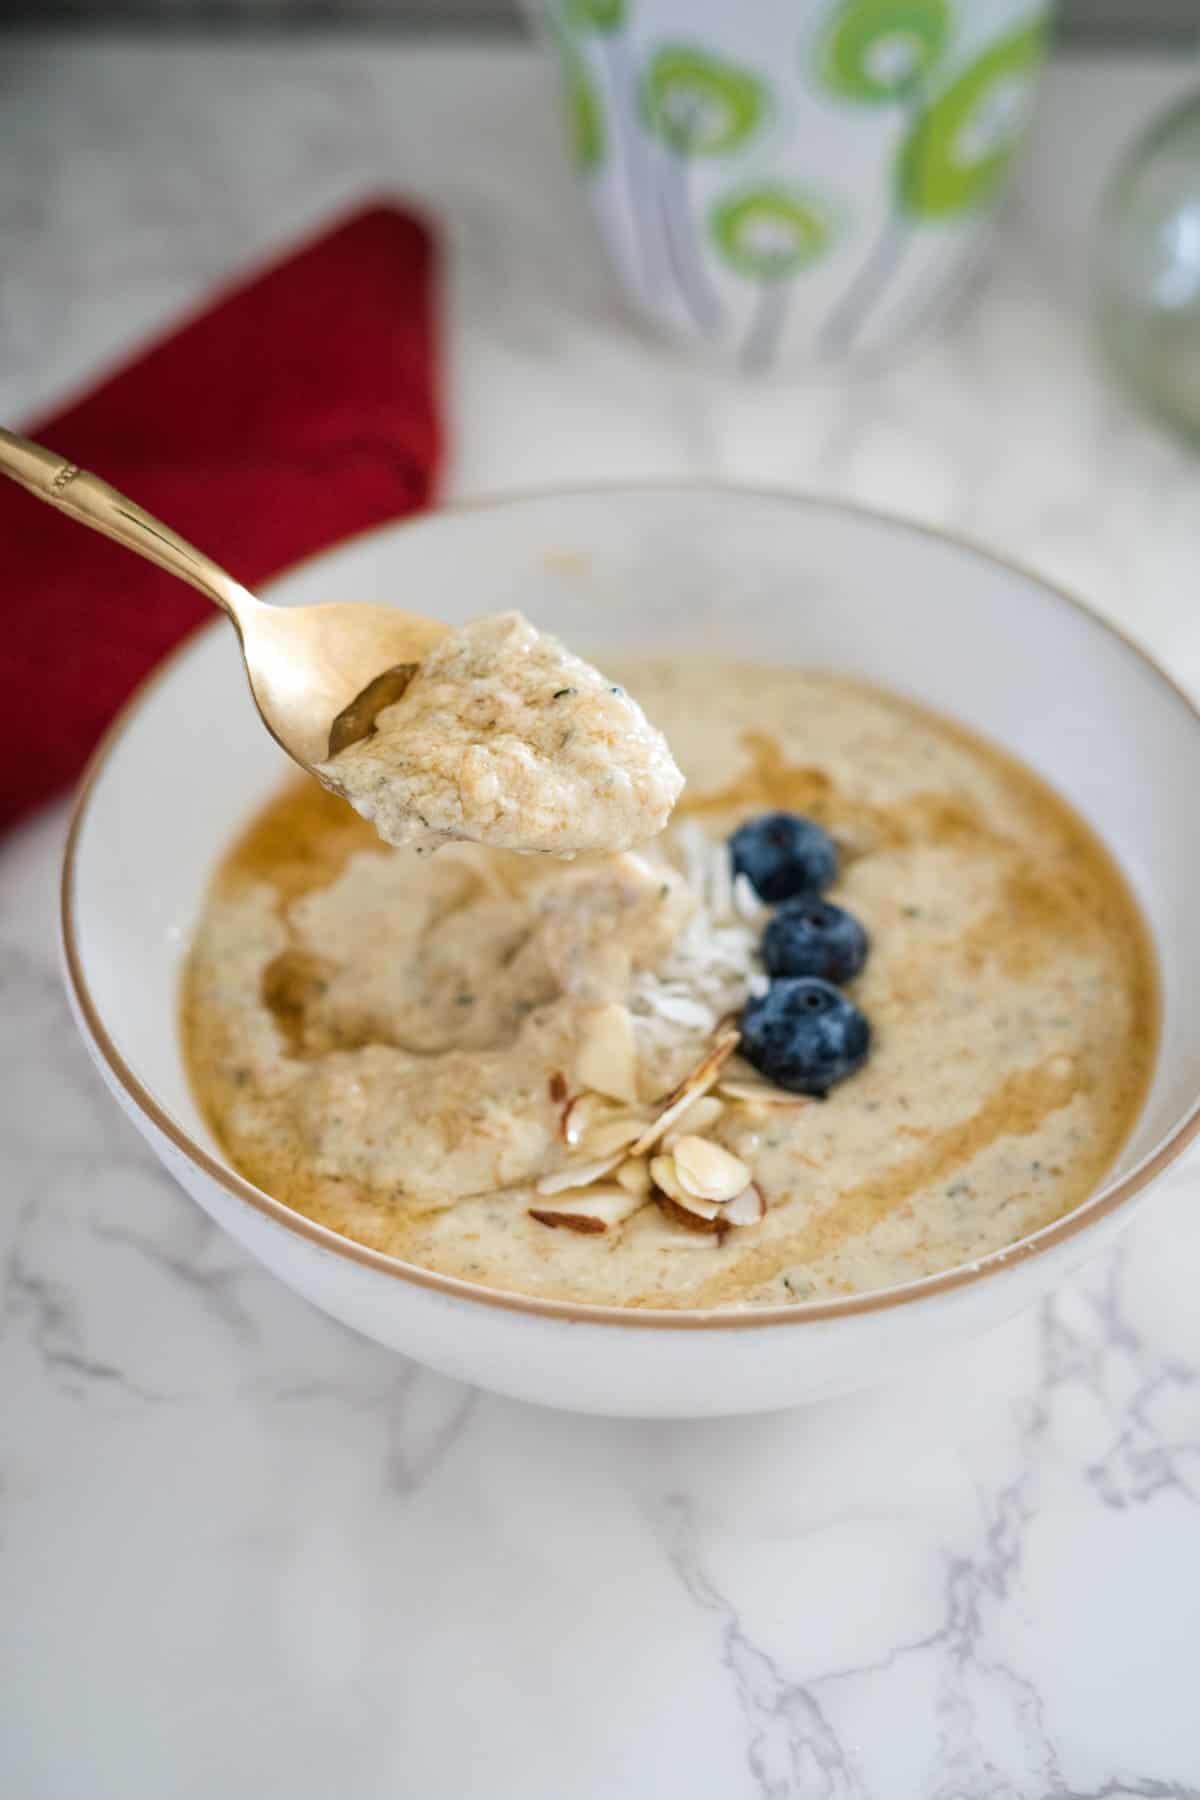 A spoon in a bowl of oatmeal with blueberries and nuts.